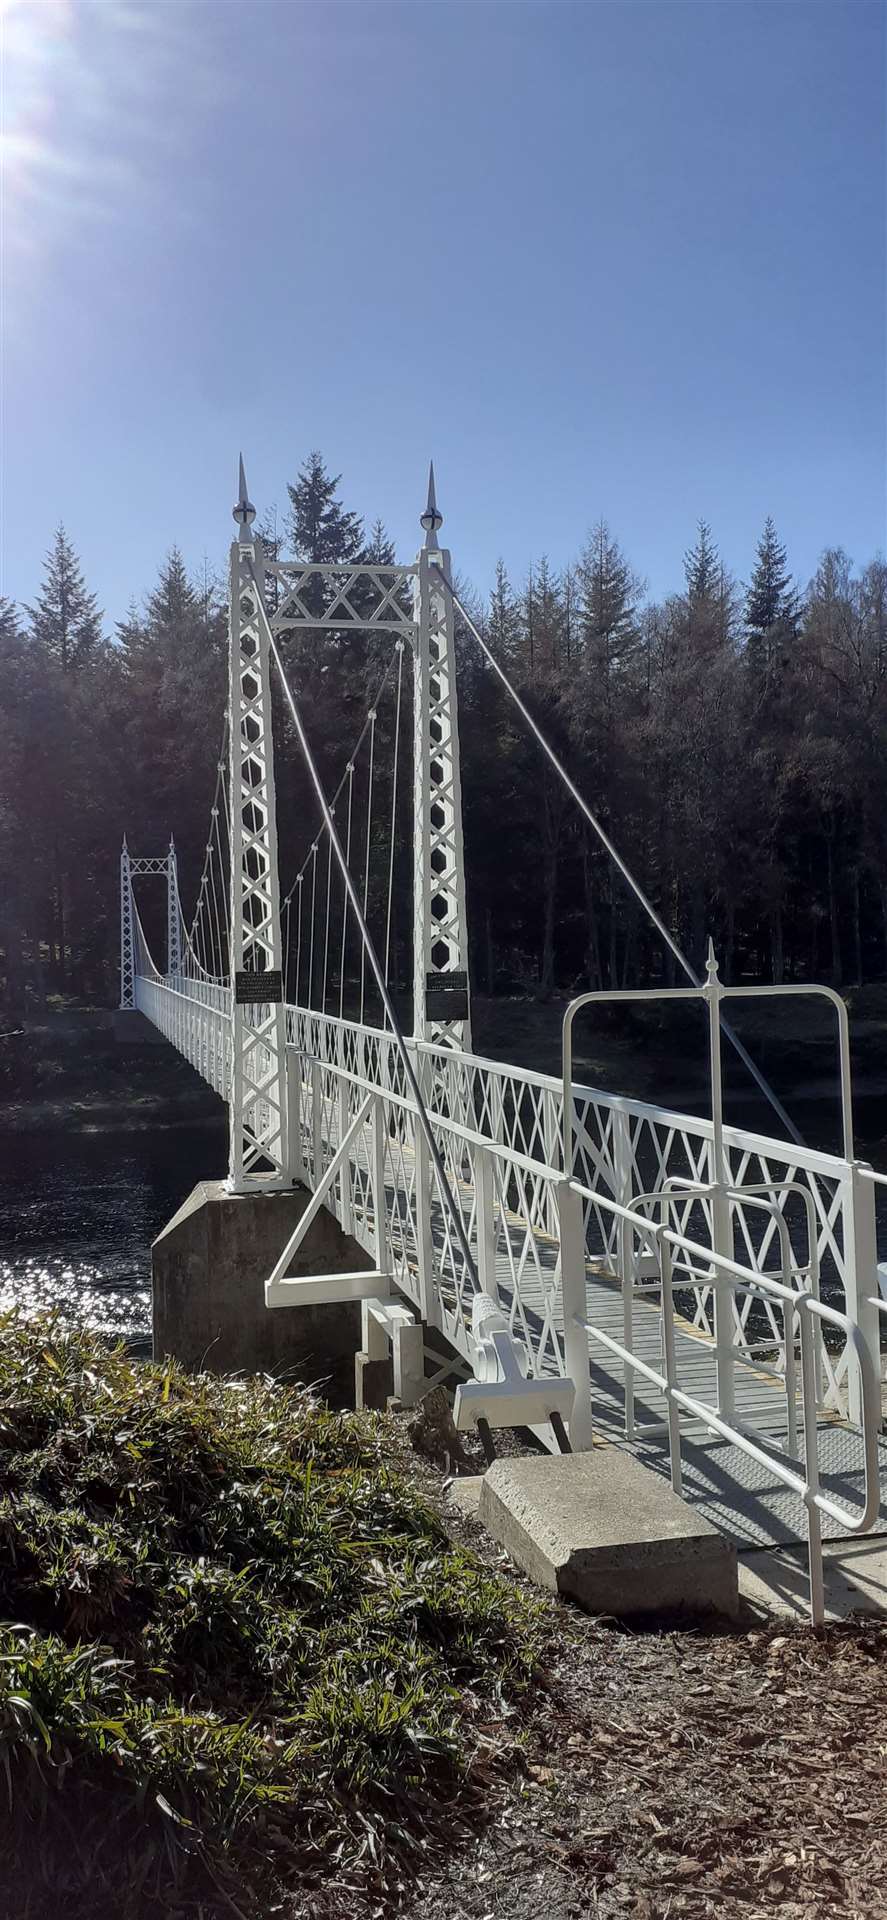 The iconic bridge has reopened after reparis were completed